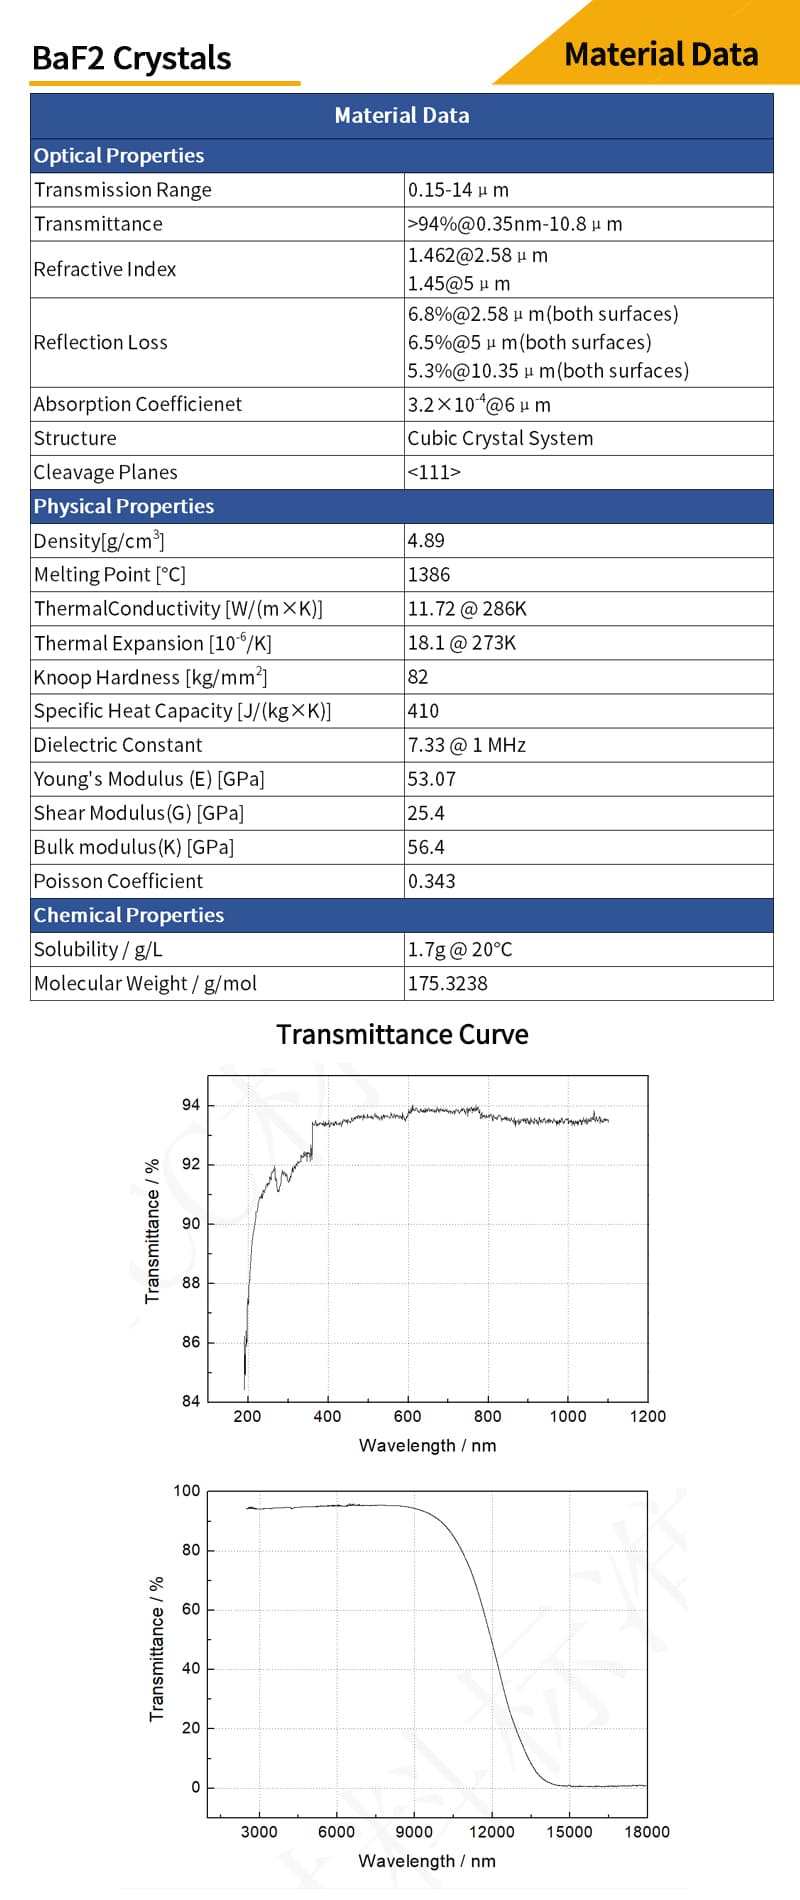 Barium fluoride round drilled  window material data and transmittance curves